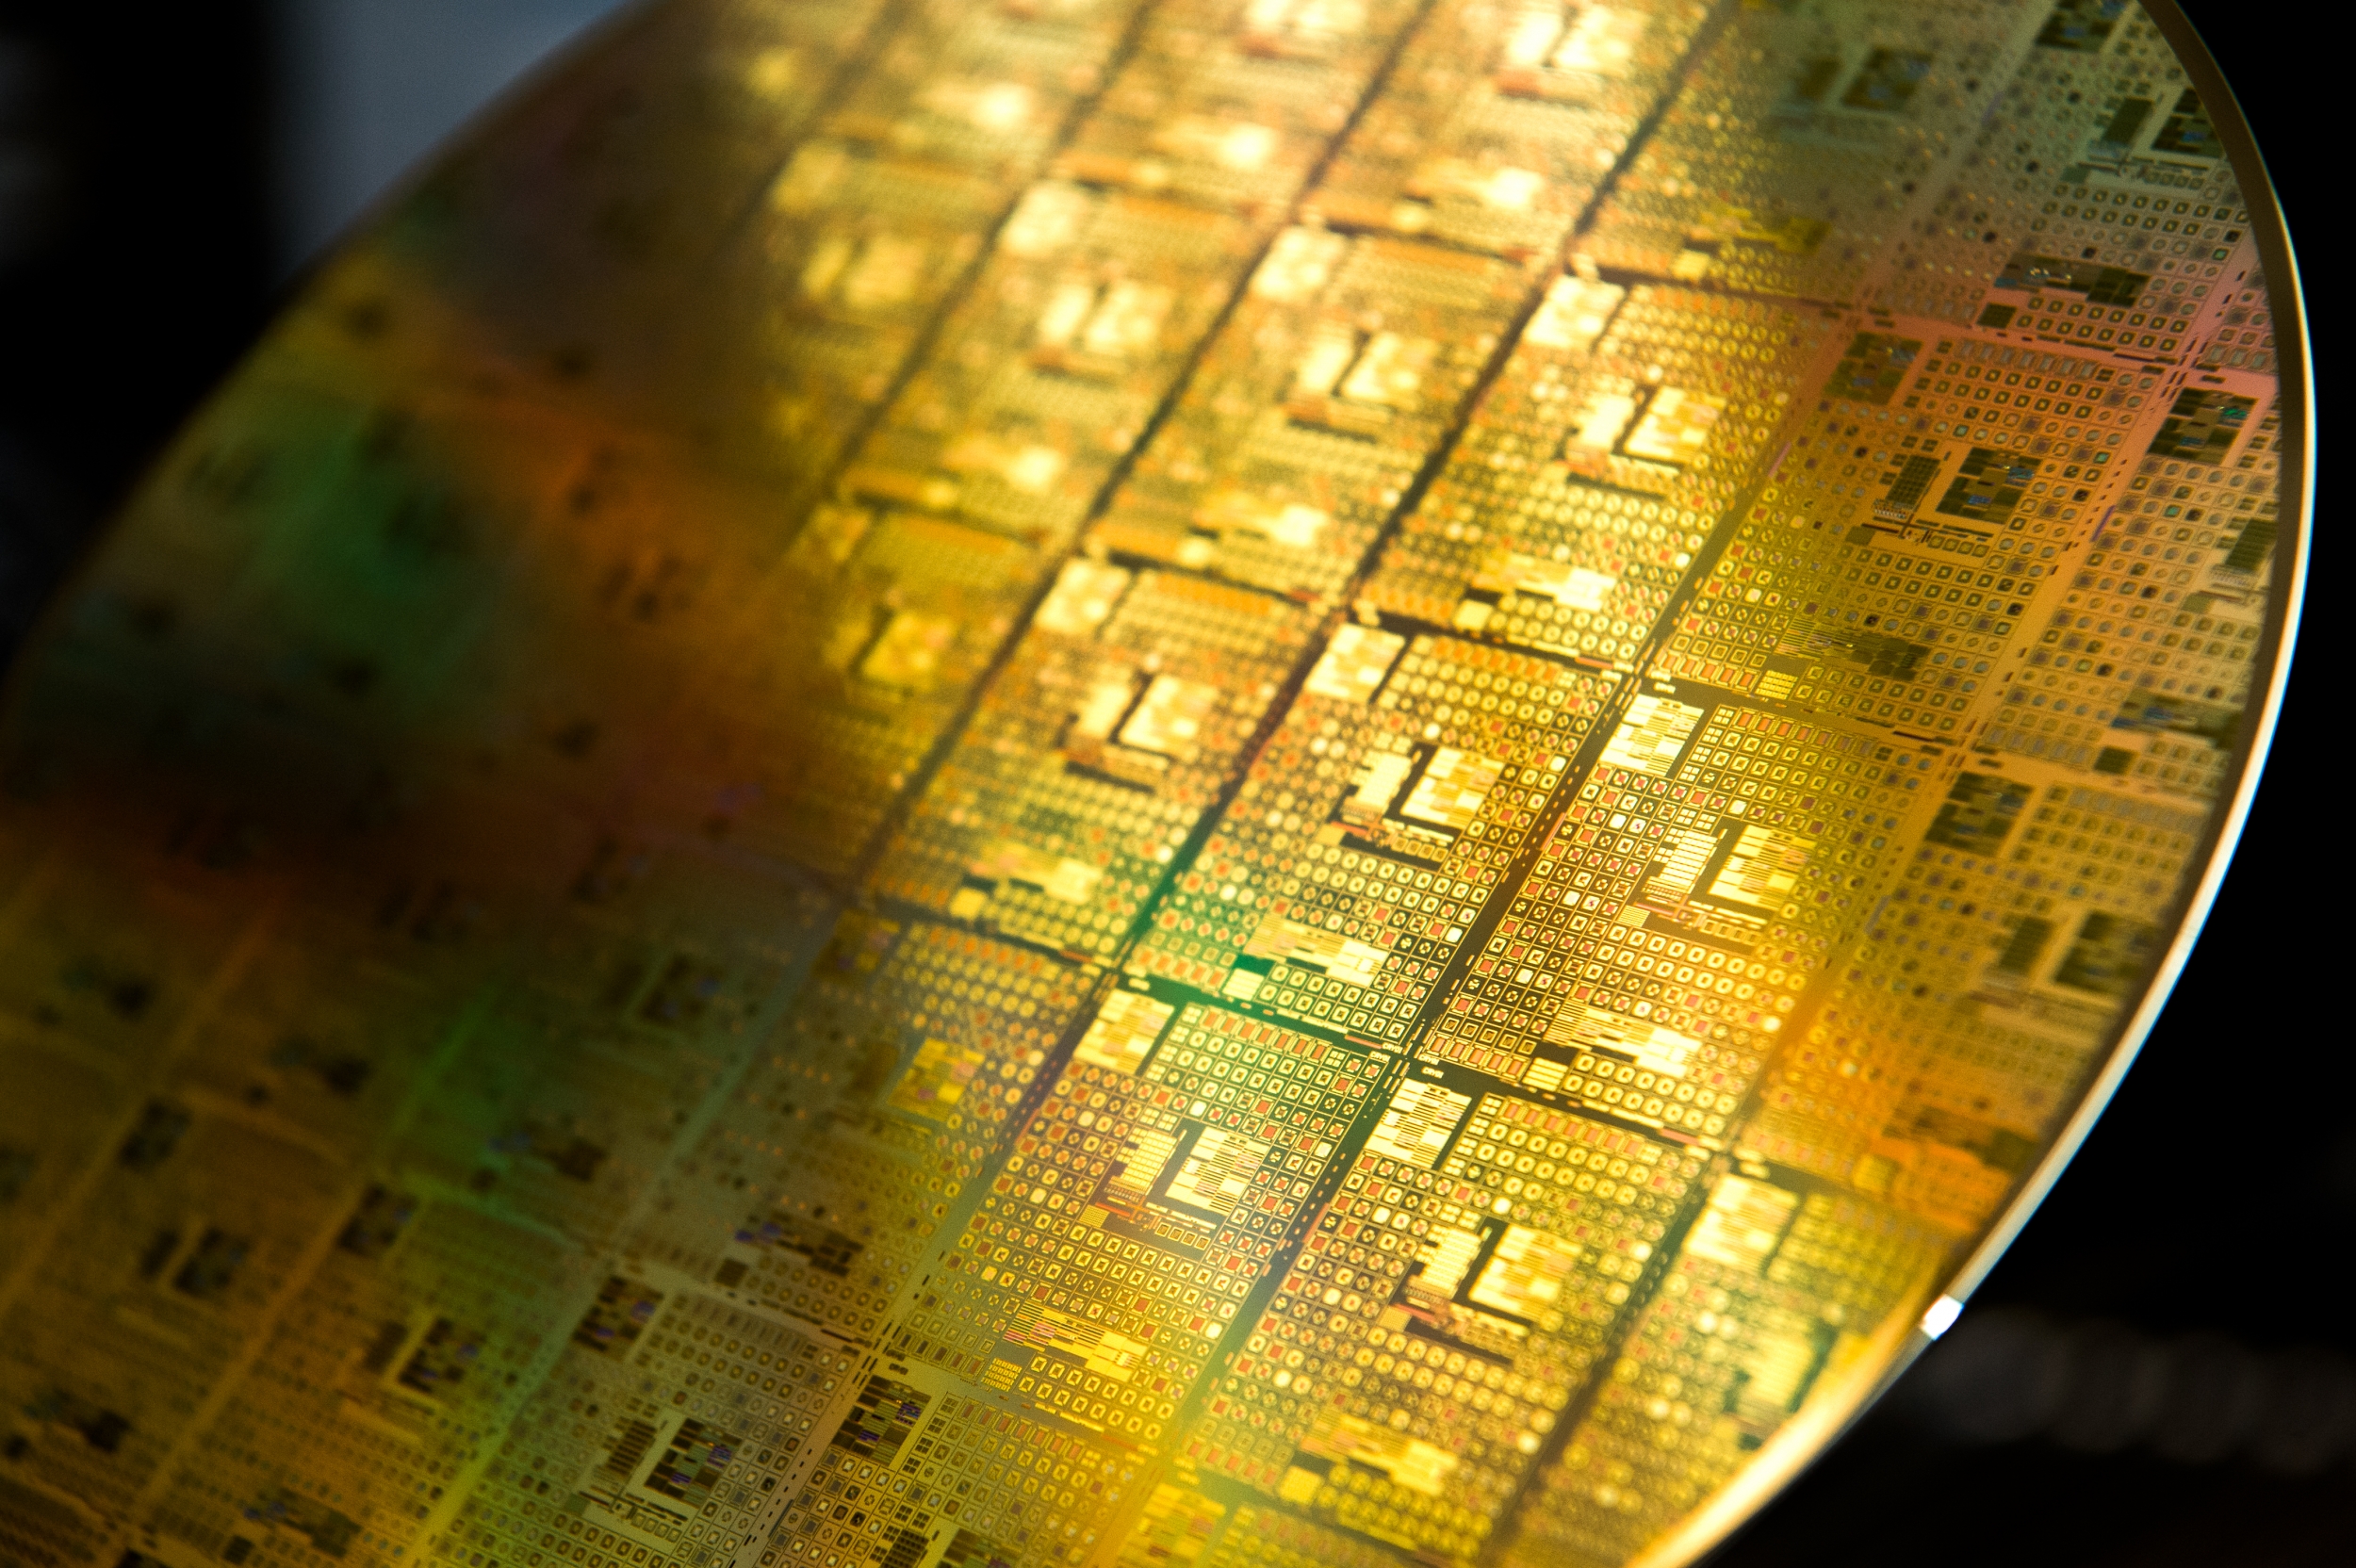 A photo of gold-colored integrated circuit wafer.